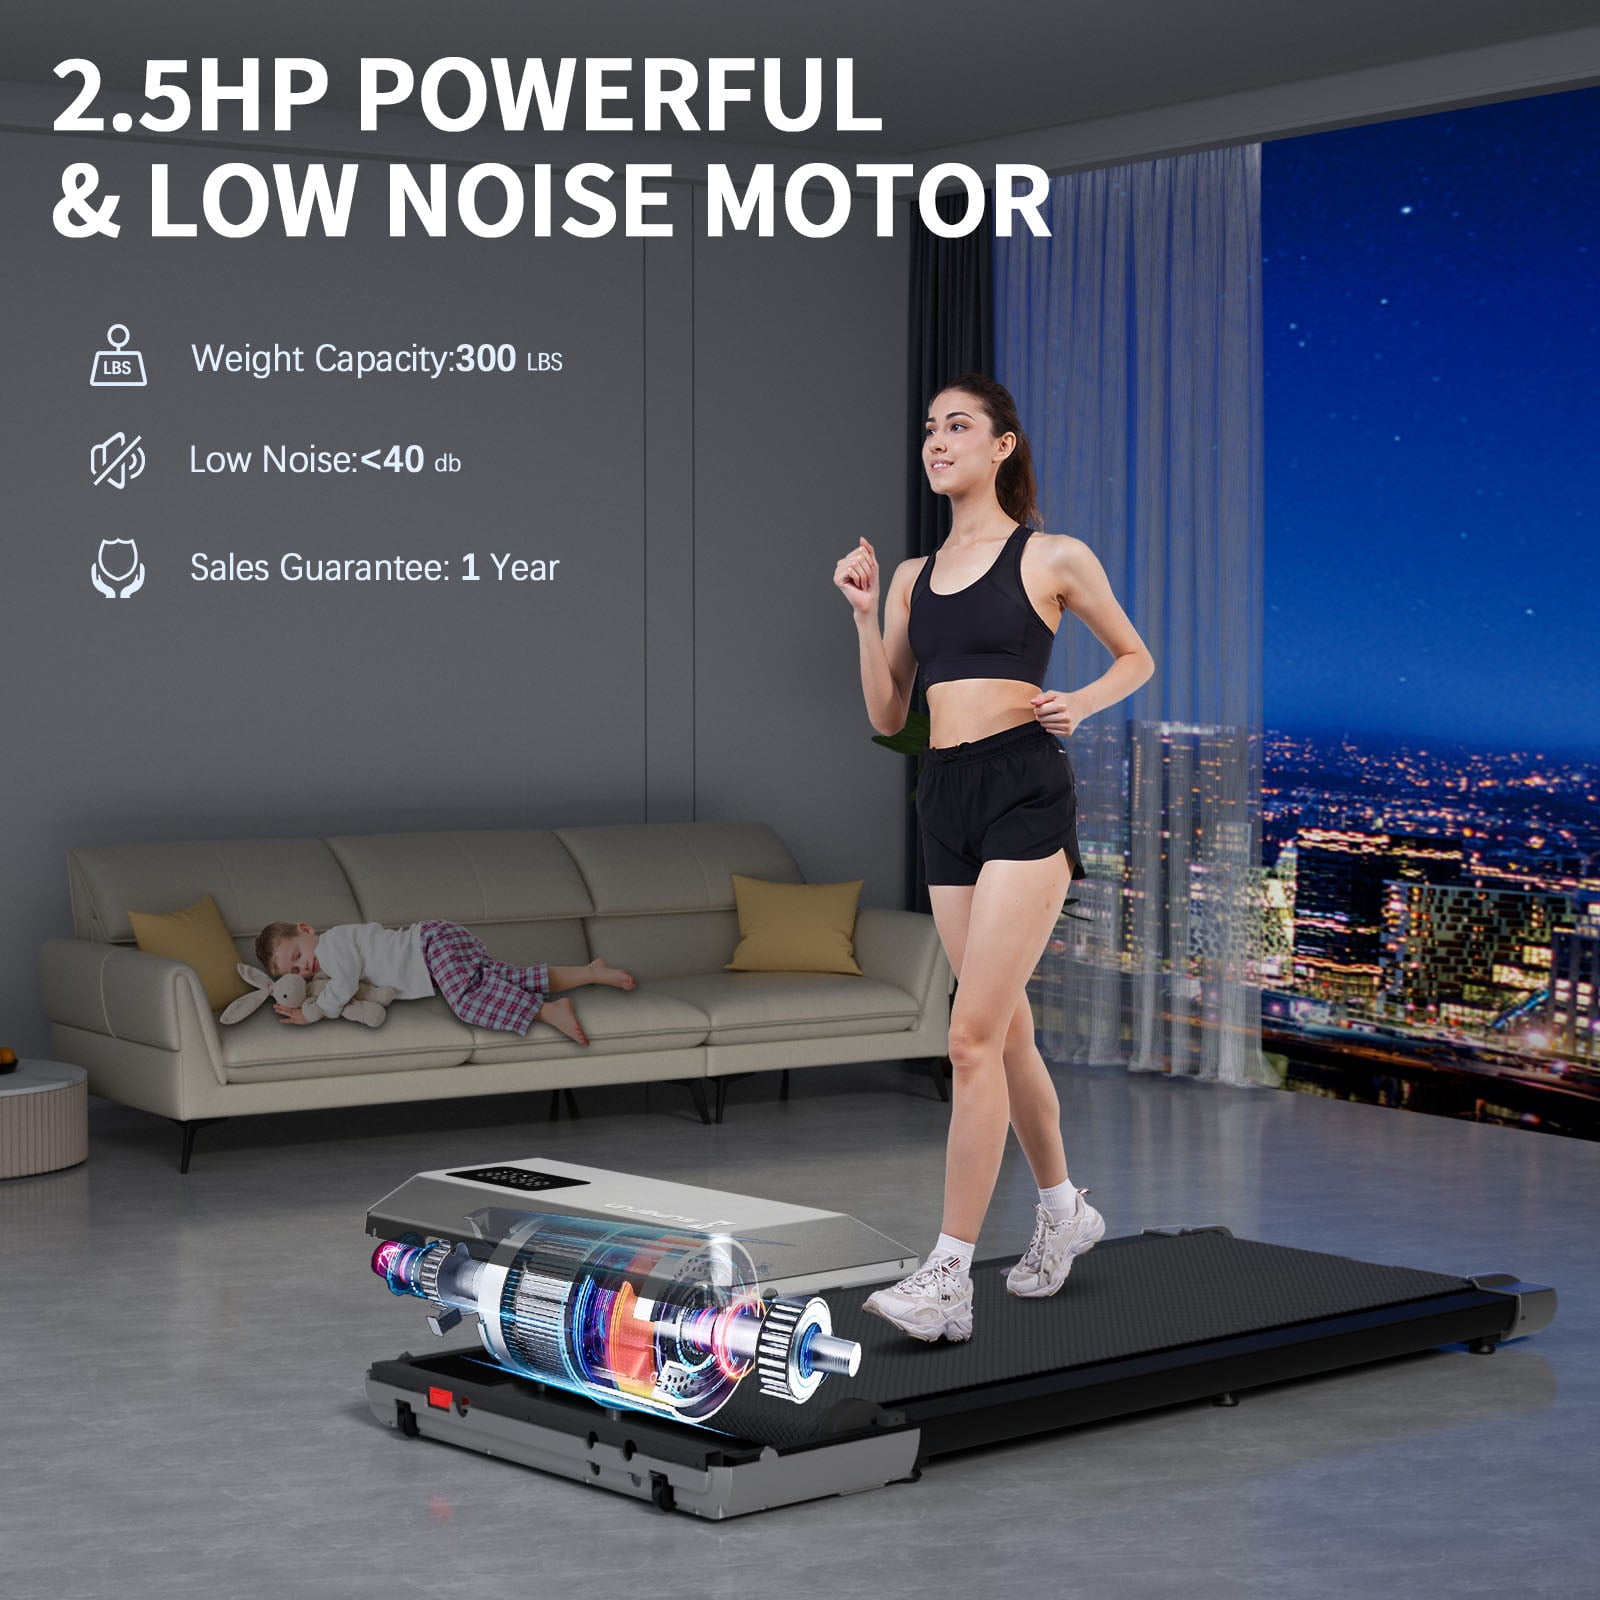 Superun 2.5Hp Walking Pad, 35.5*15.5 Walking Area 2 in 1 Under Desk Treadmill,300lb Walking Treadmill with Remote Control and LED Display, Quiet, Compact & Small Treadmill for Home & Office (White)